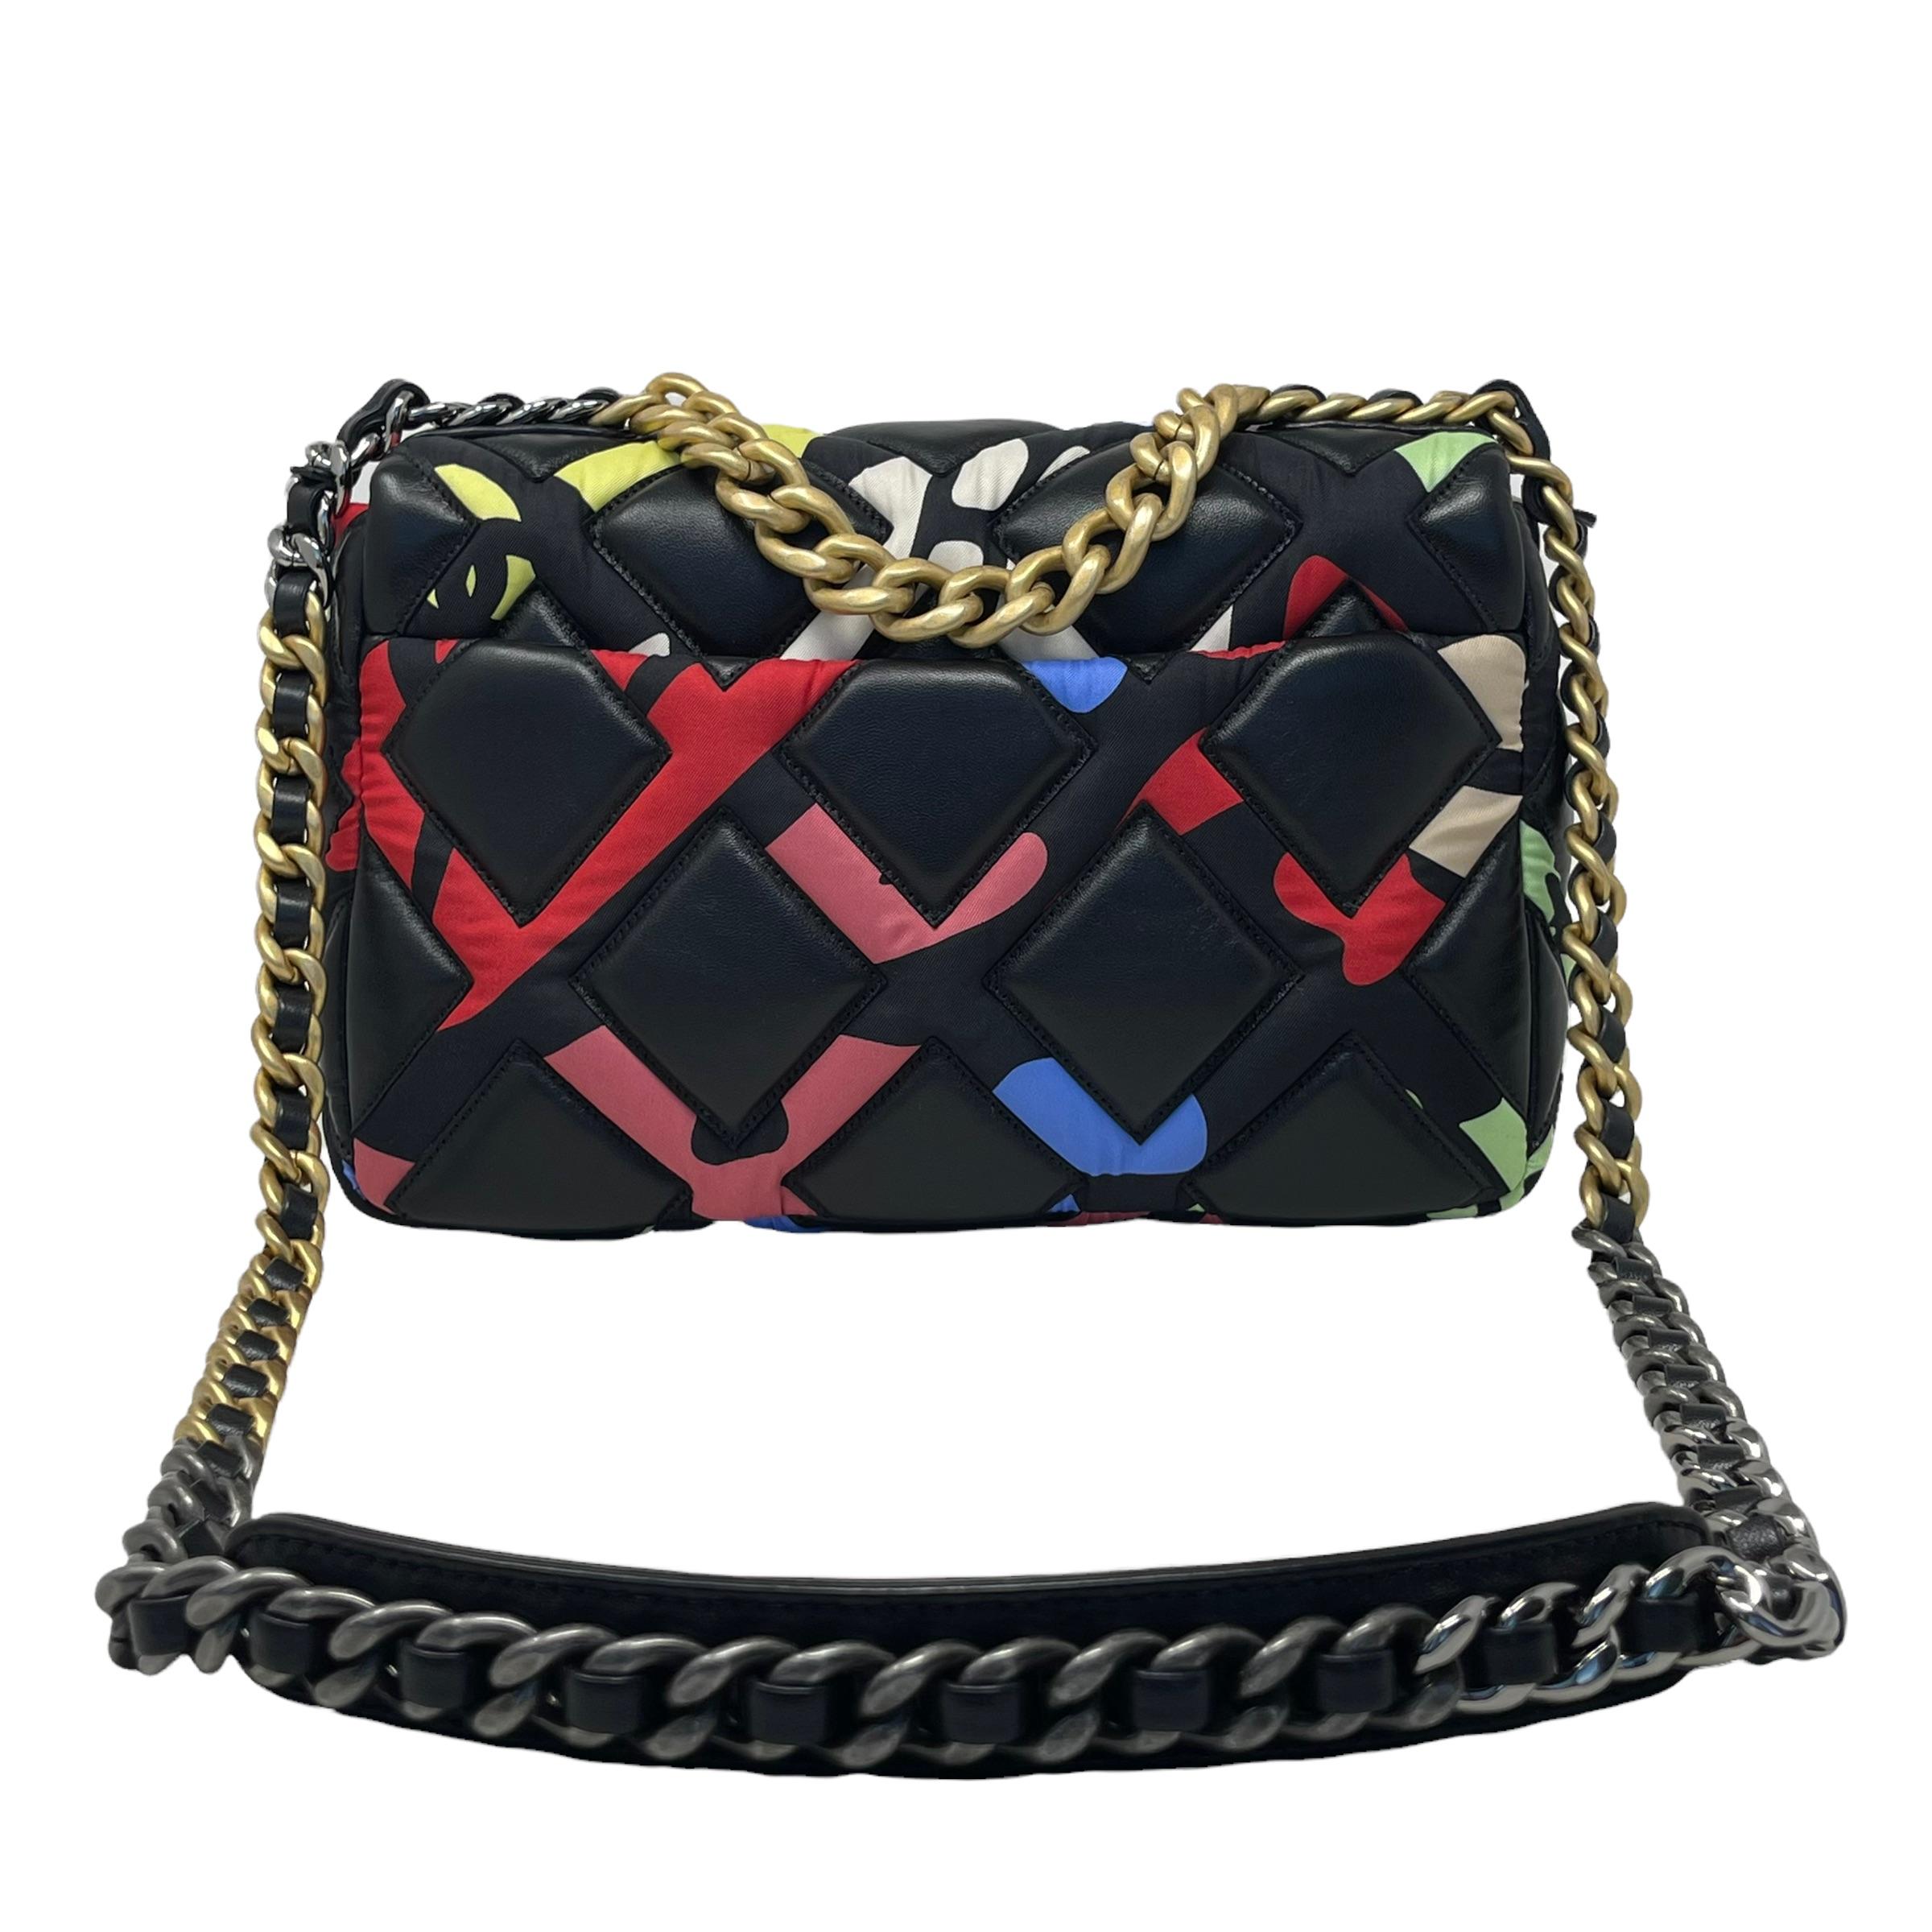 NEW Chanel Black Multicolor Small 22S Lambskin Chanel 19 Flap Crossbody Bag For Sale 1